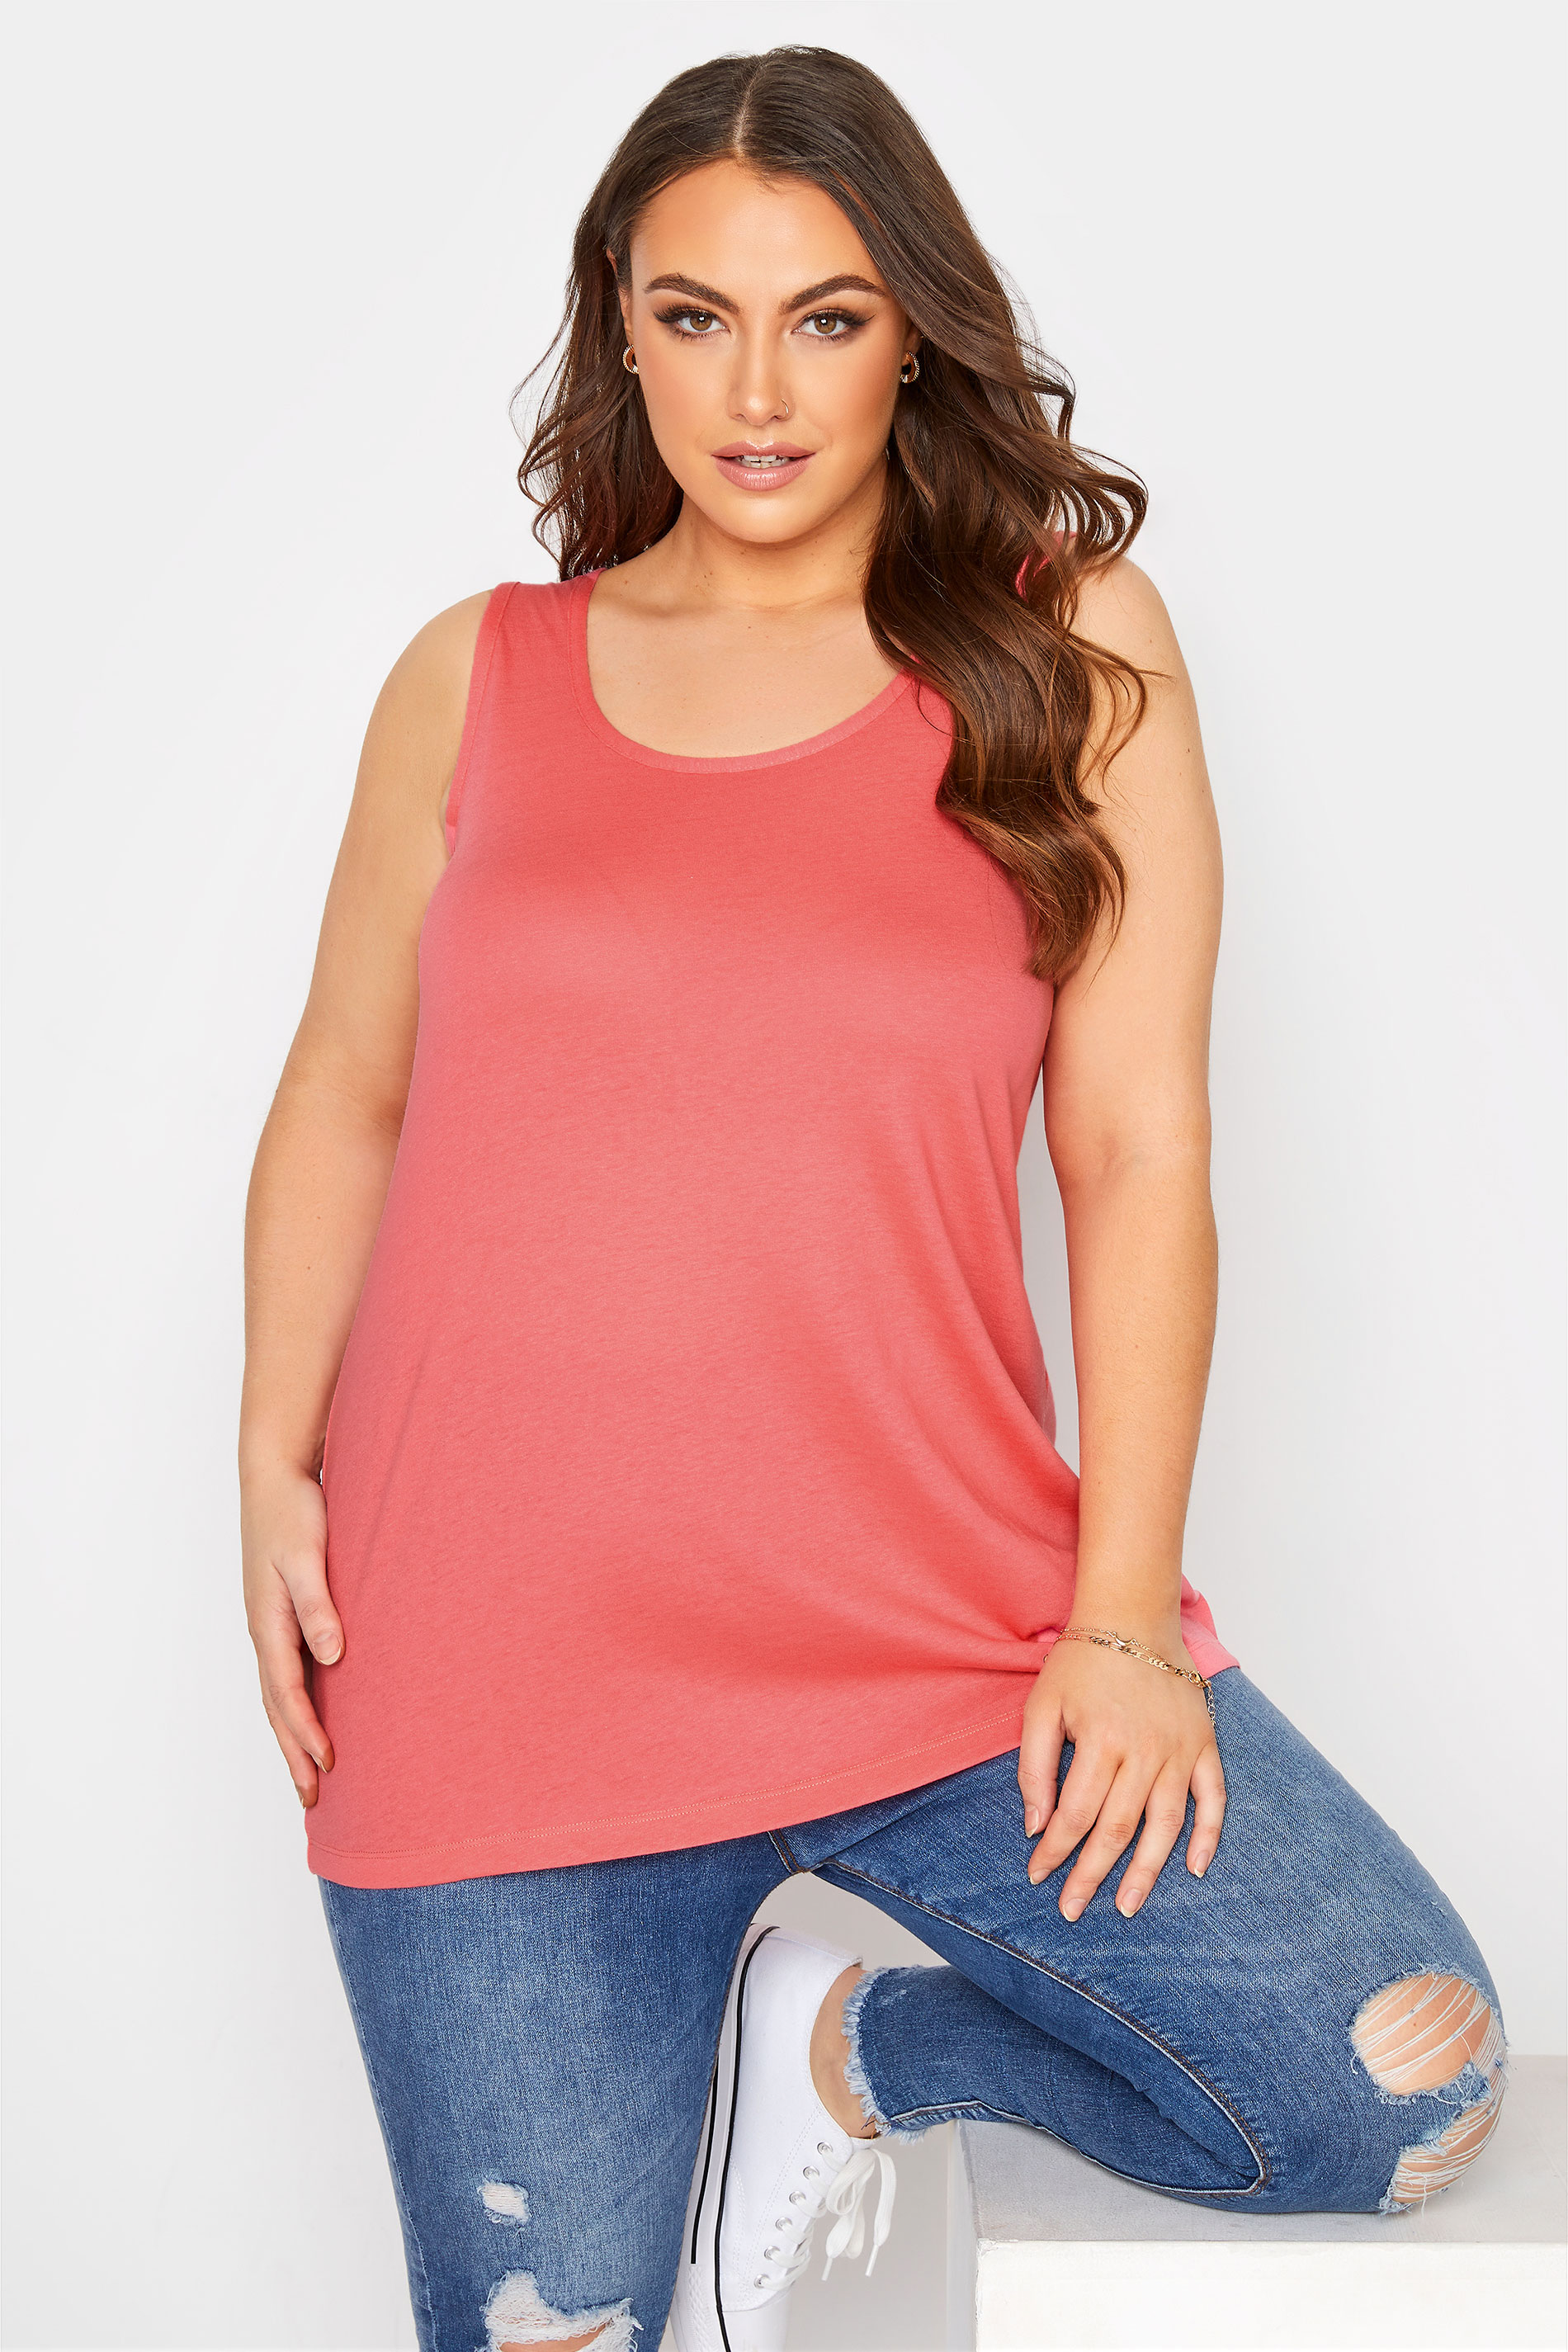 Curve Bright Coral Pink Basic Vest Top_A.jpg